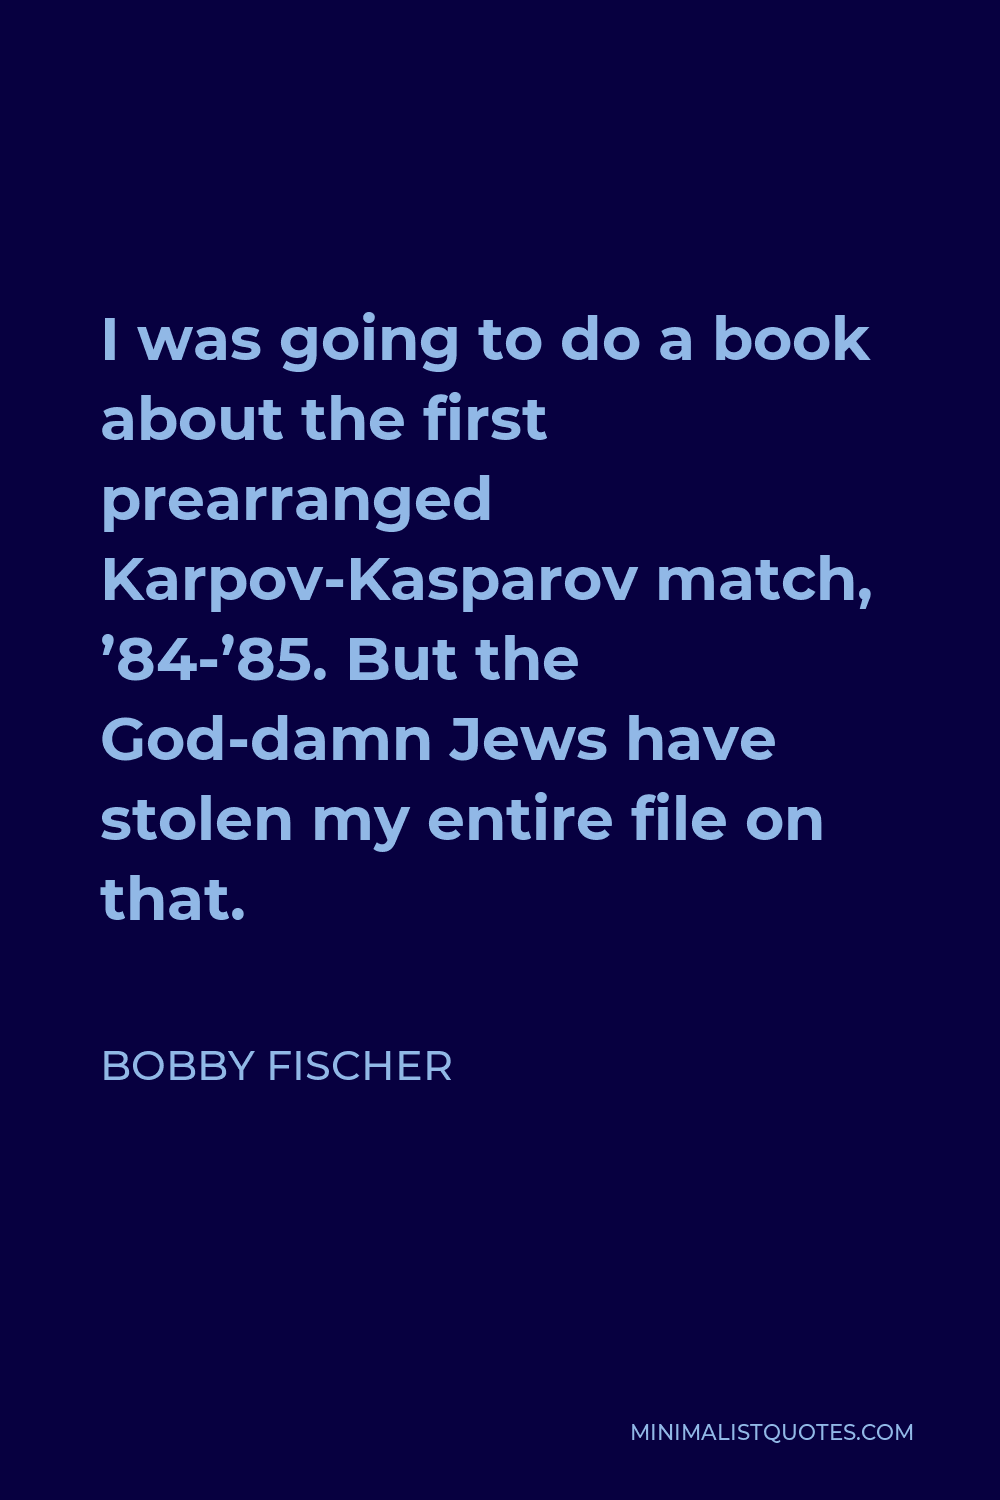 Bobby Fischer Quote - I was going to do a book about the first prearranged Karpov-Kasparov match, ’84-’85. But the God-damn Jews have stolen my entire file on that.